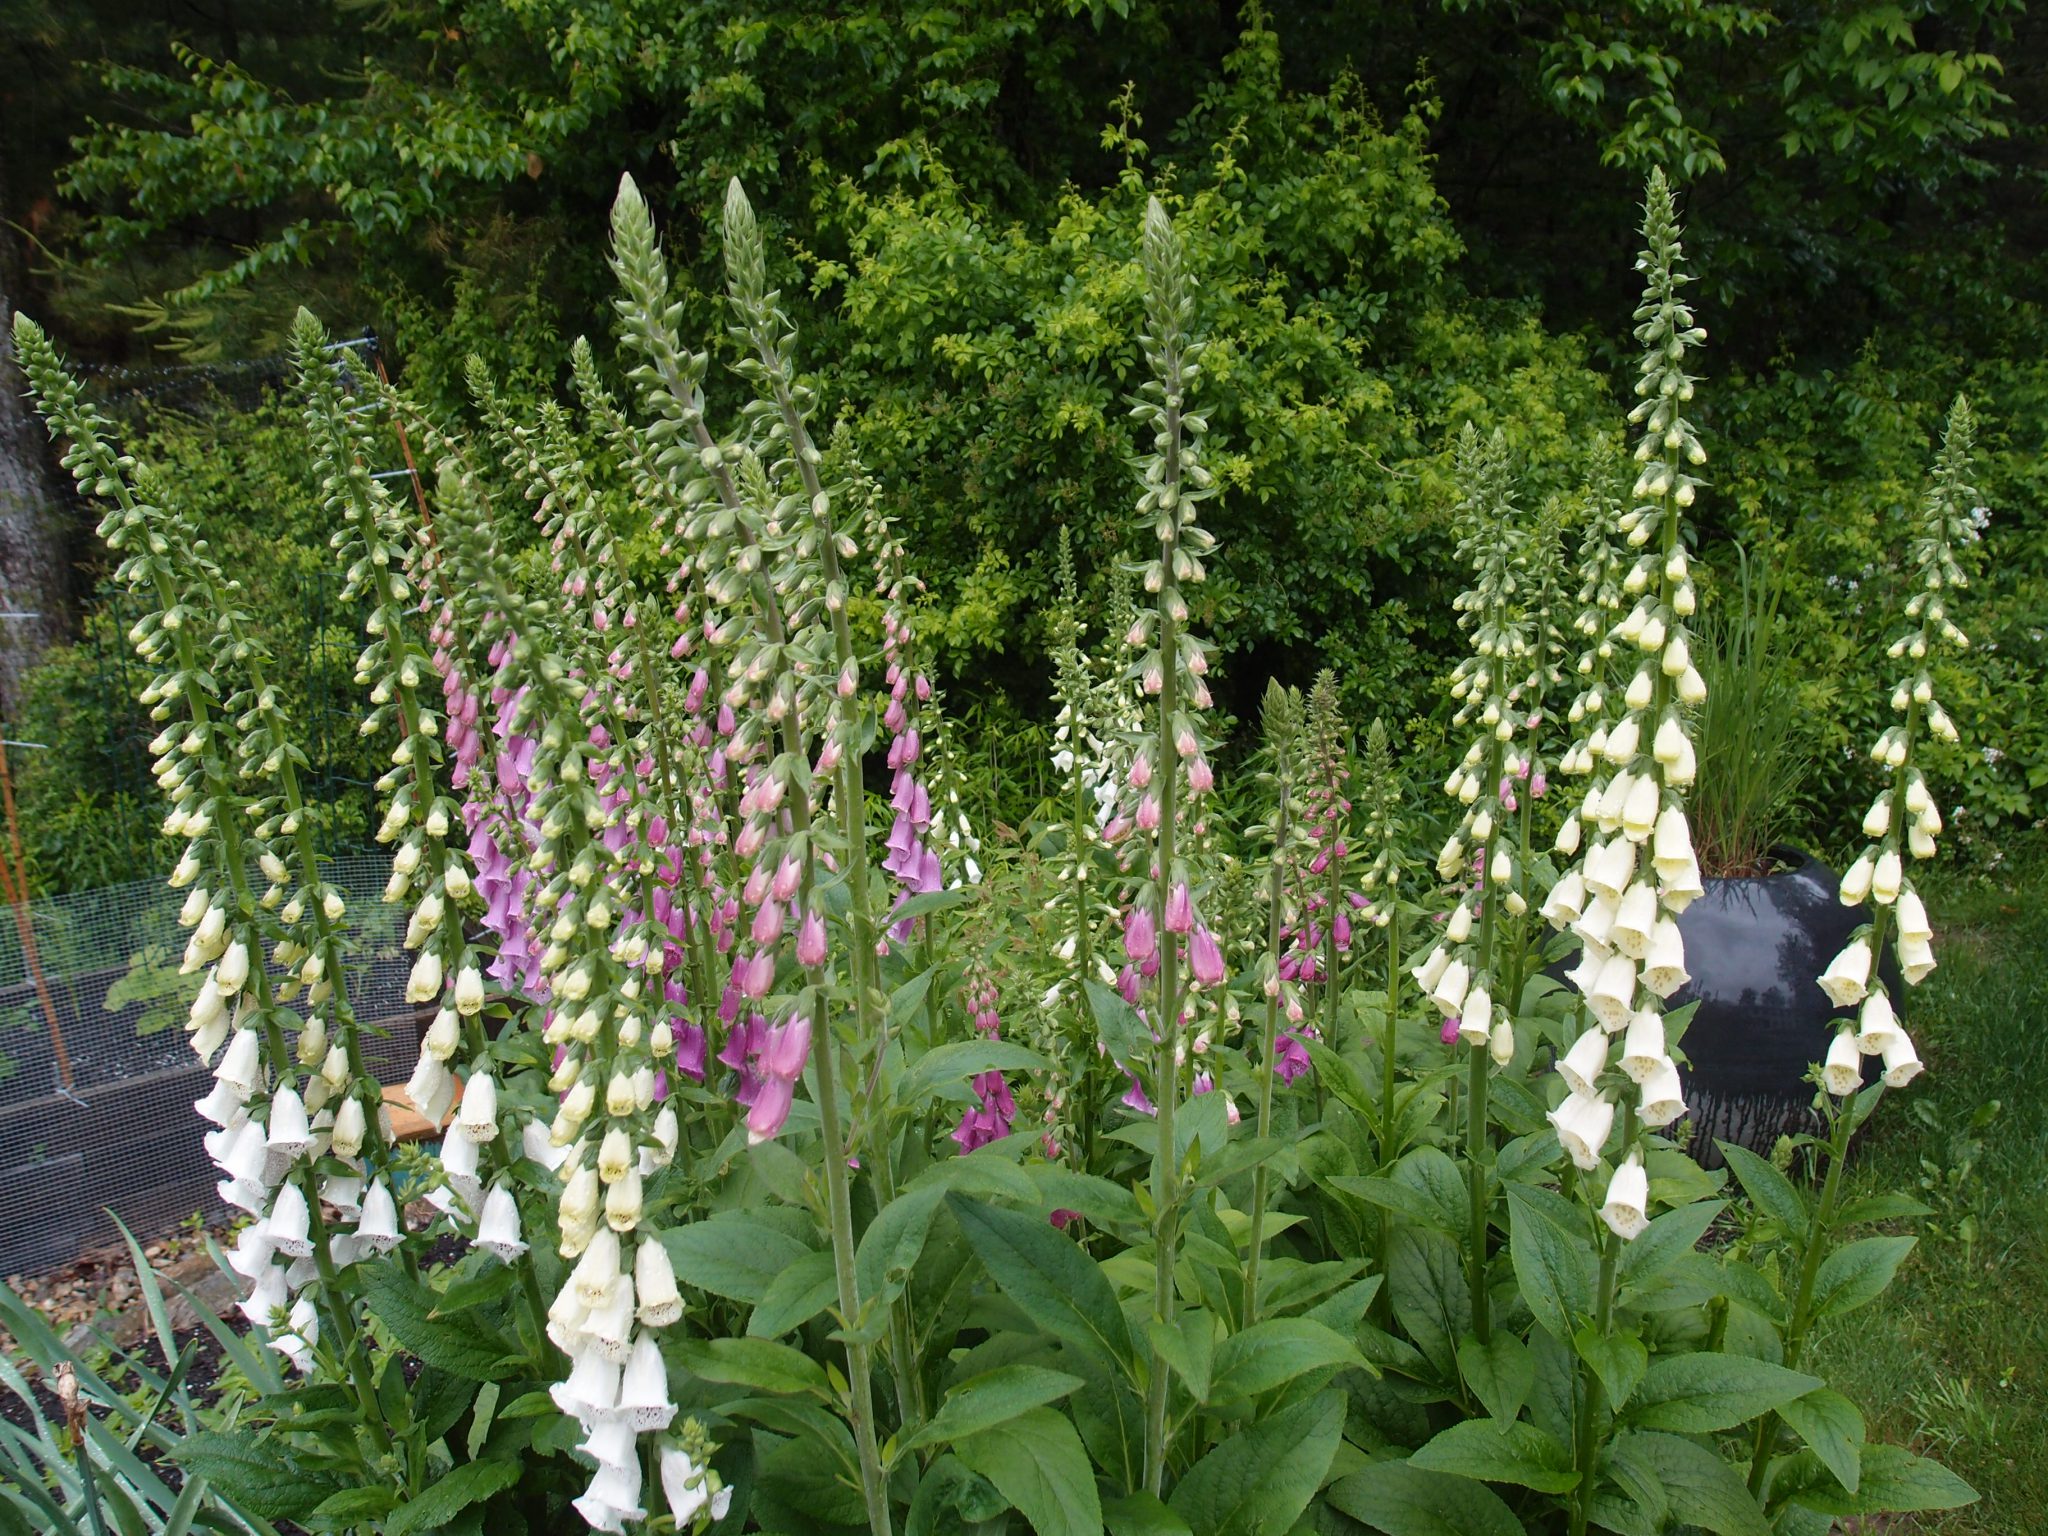 Giant Foxgloves begun from seed in the Spring of 2012 finally bloom